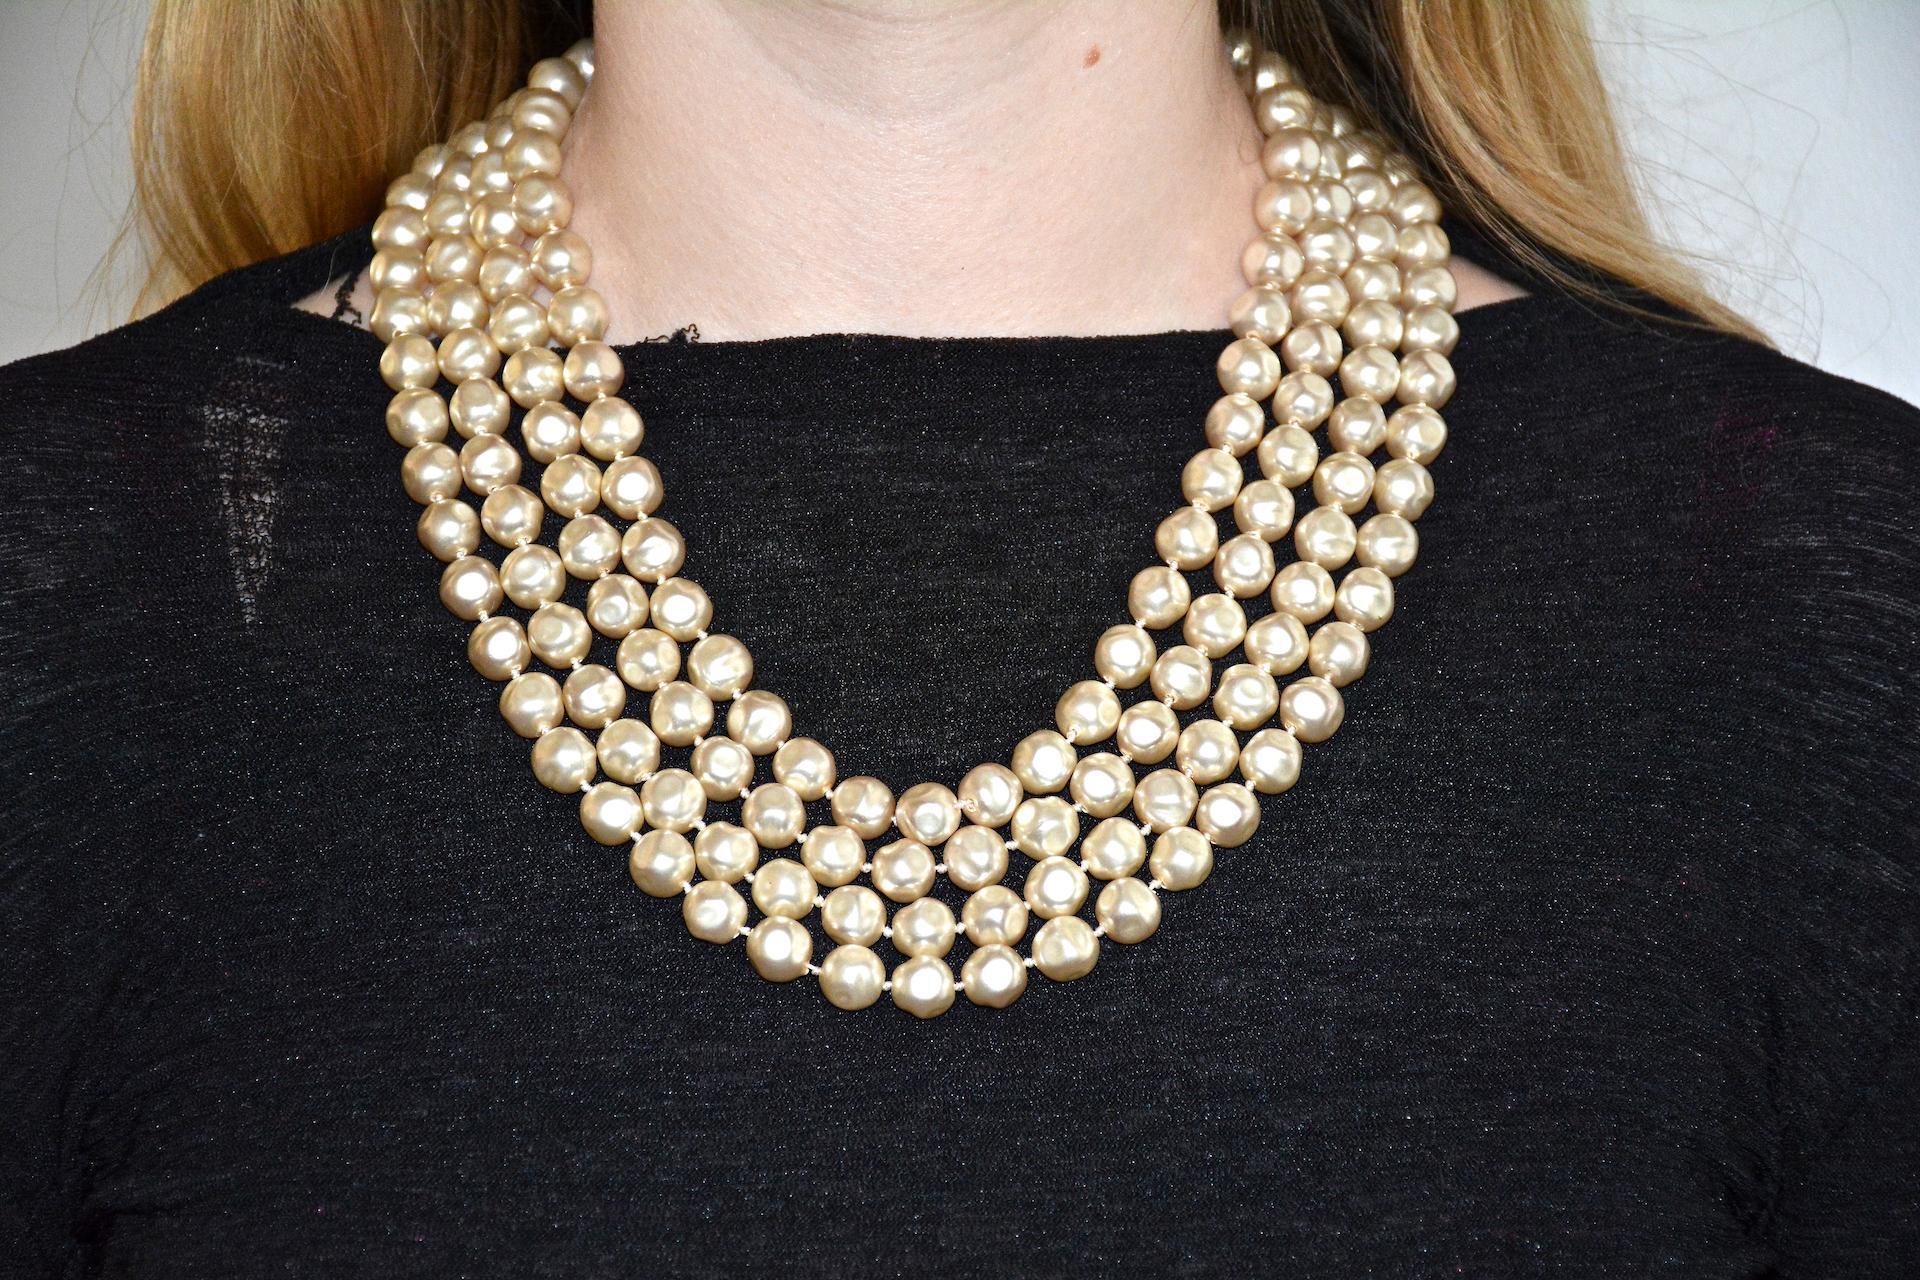 Chanel Vintage 1983 Four-Strand Baroque Pearl Necklace, Ornate Medallion Clasp In Good Condition For Sale In Los Angeles, CA